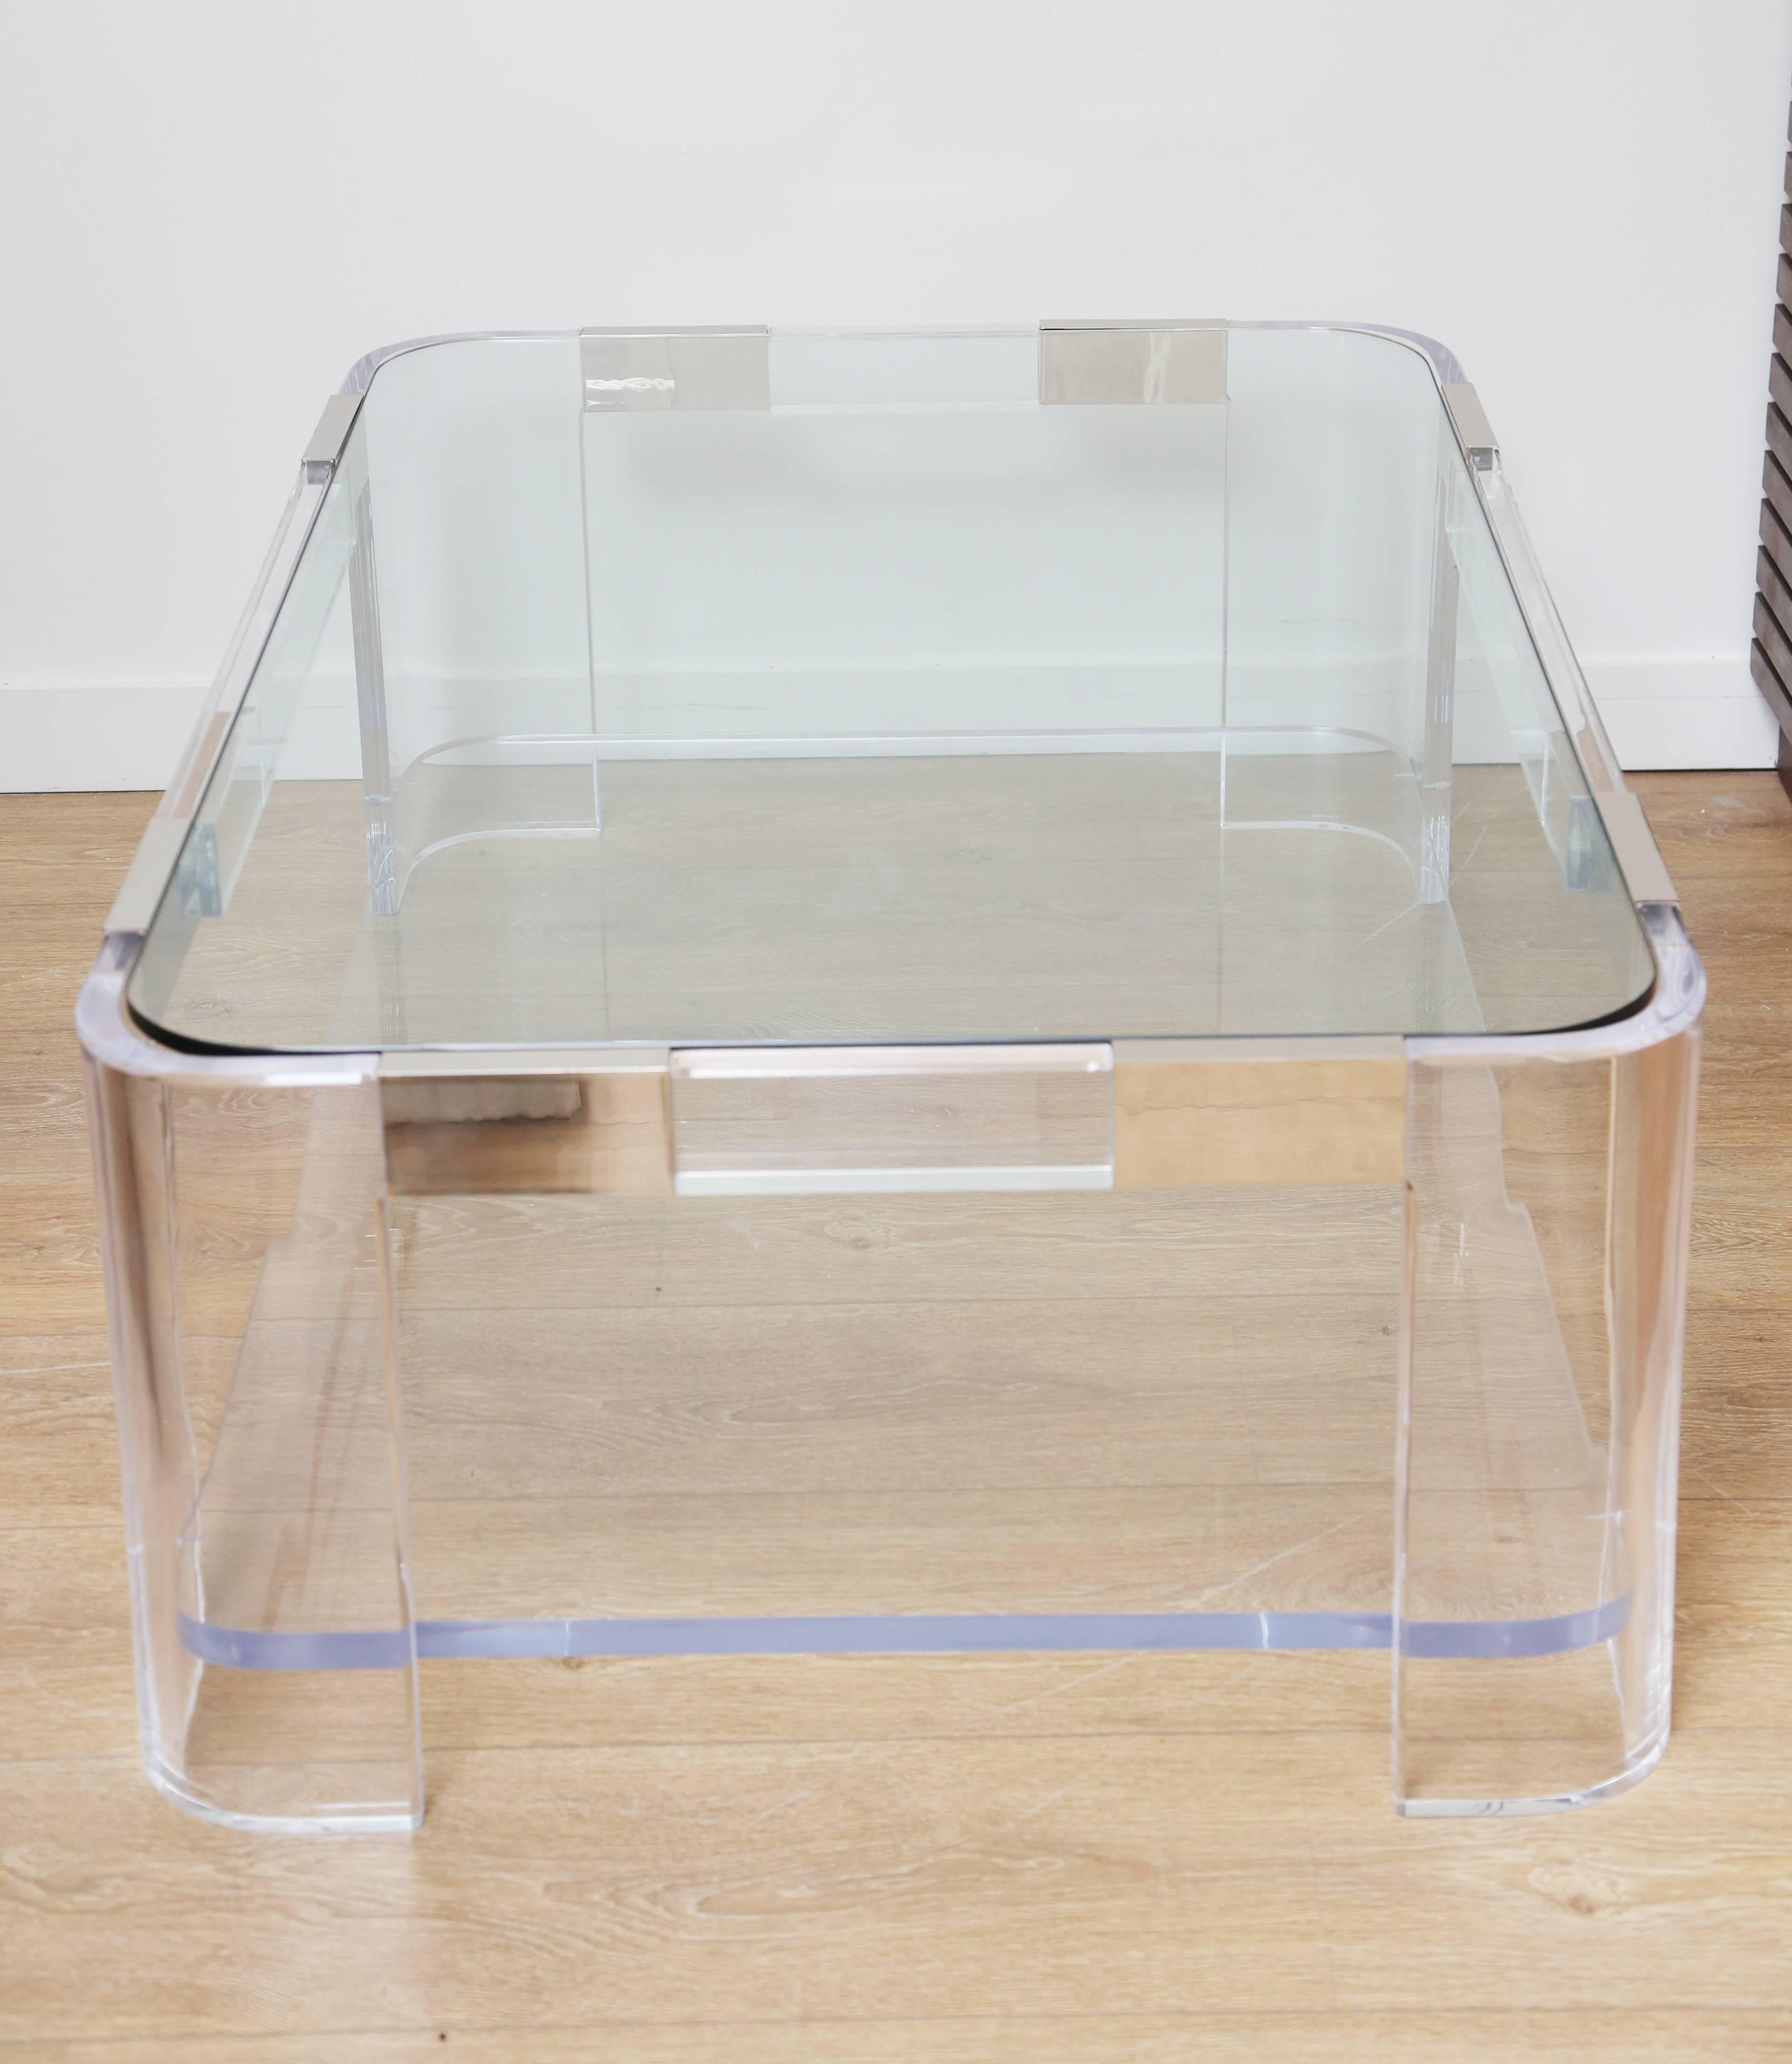 Late 20th Century Large Lucite Two-Tier Coffee Table by Charles Hollis Jones.